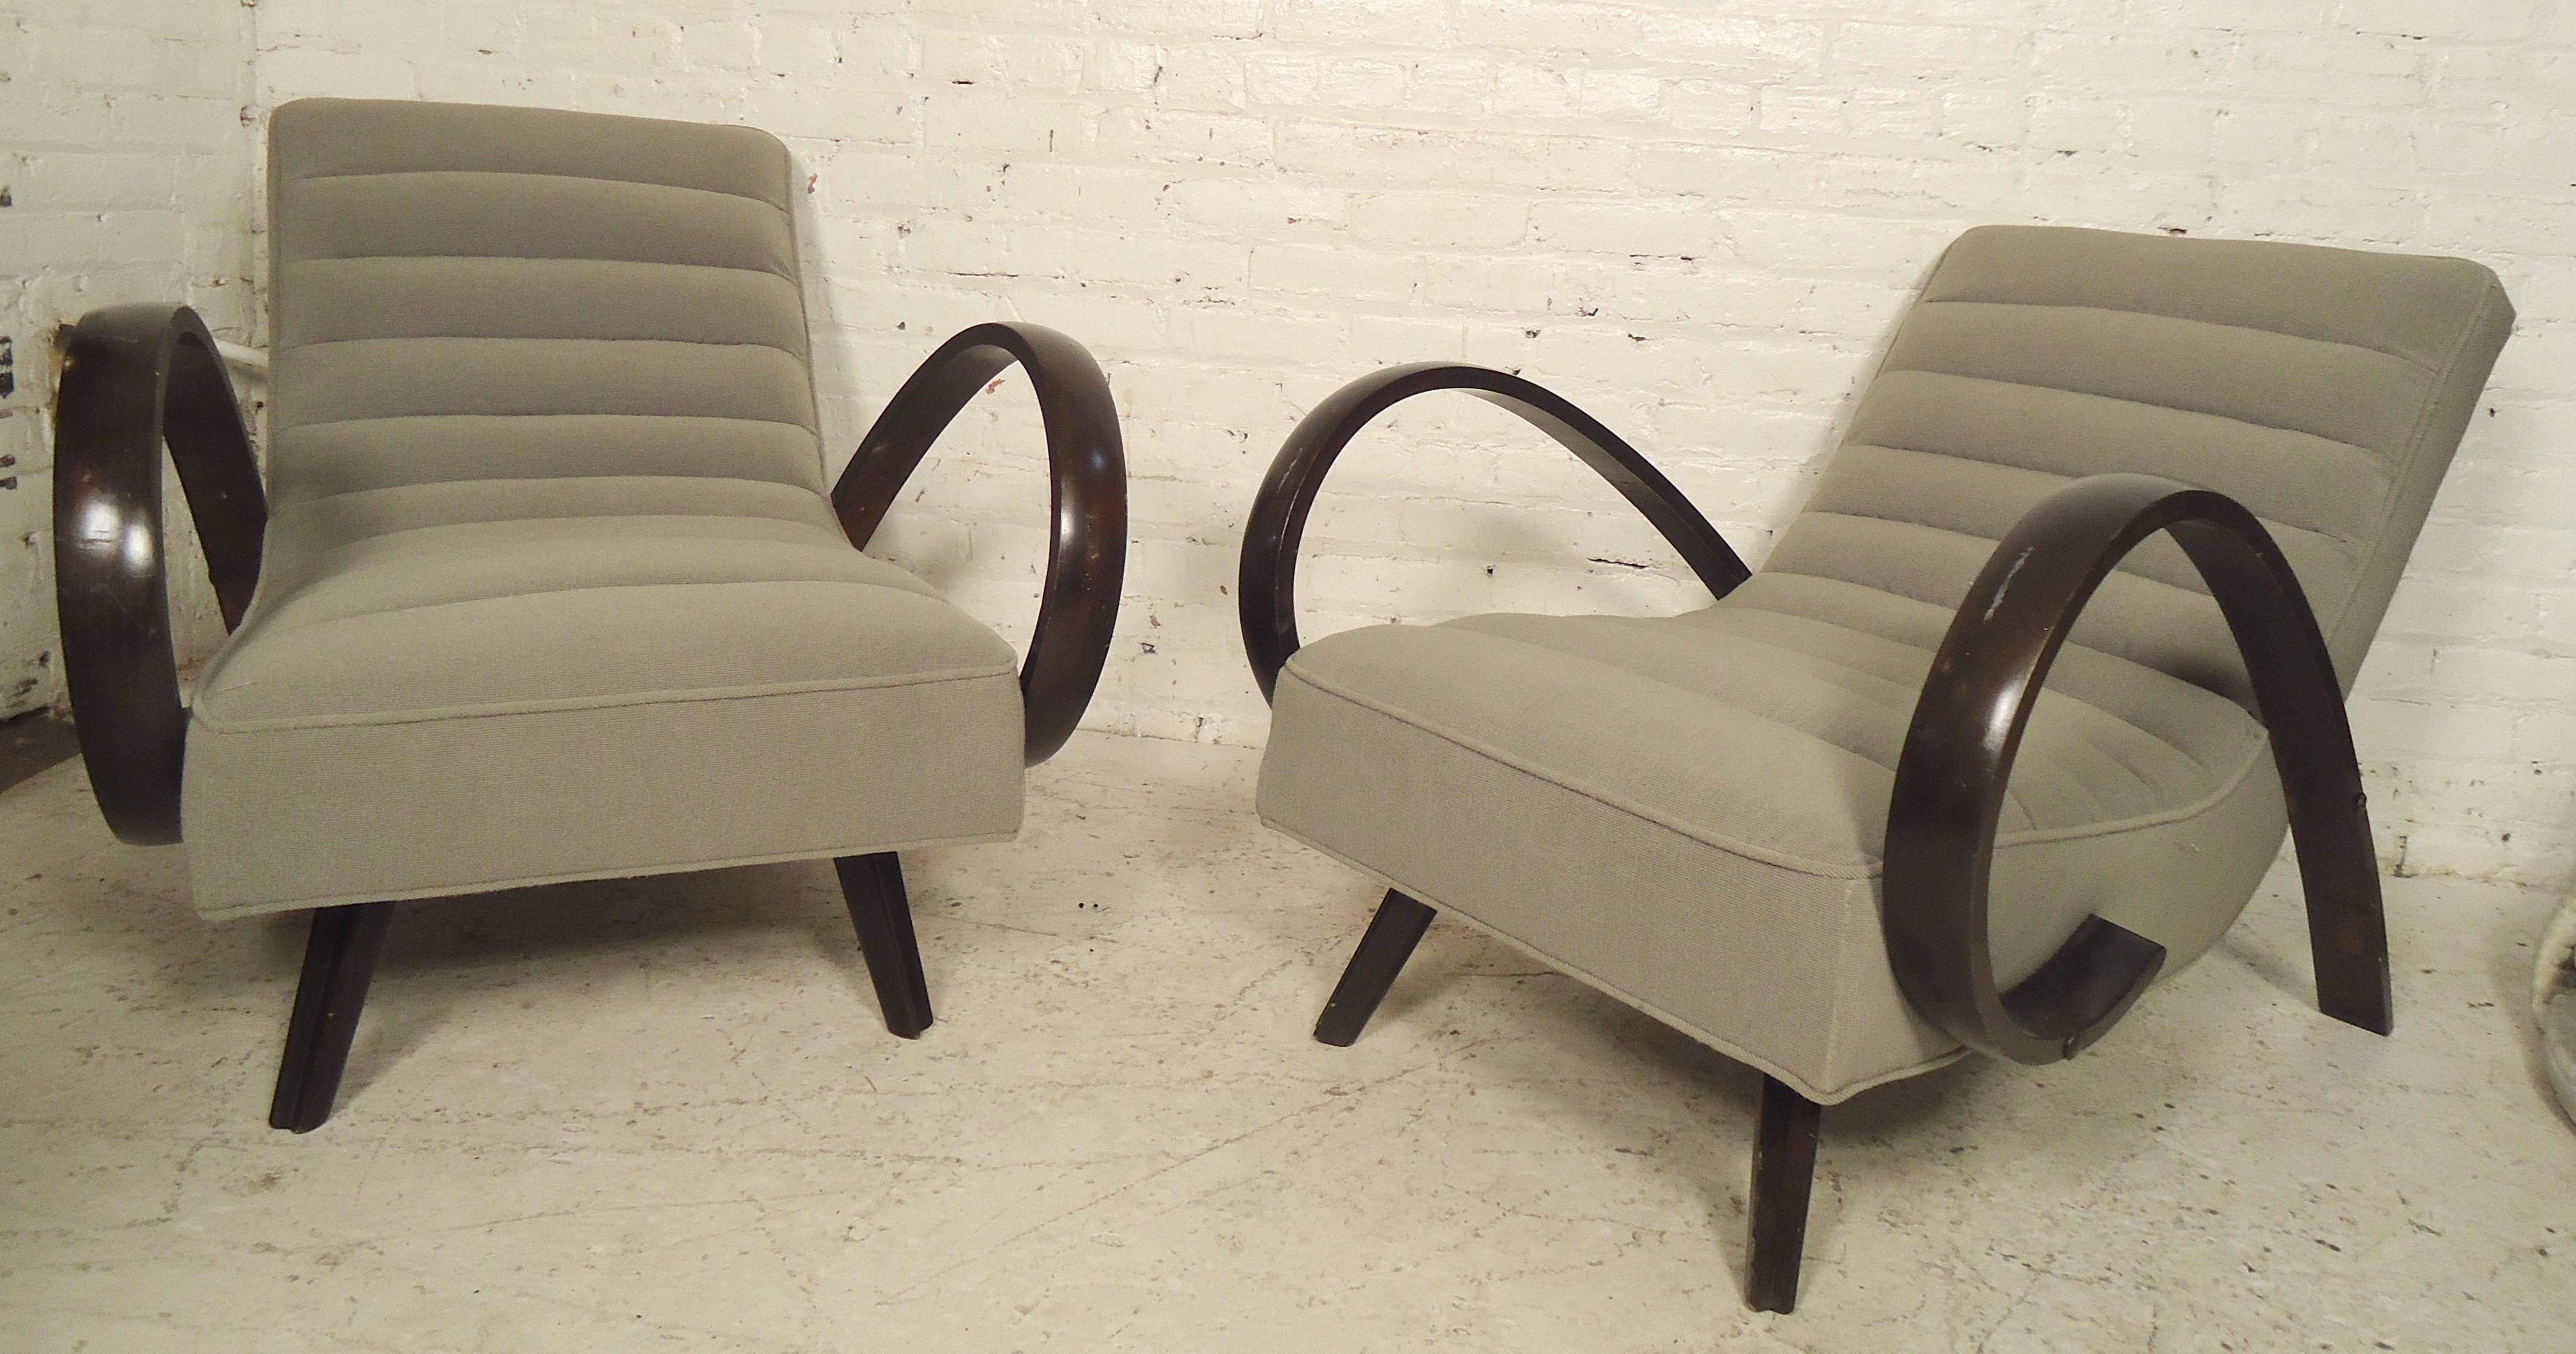 Pair of striking Mid-Century style armchairs with swooping wood arms that flow to the back. Distinct modern style with comfortable cushioned seating.

(Please confirm item location - NY or NJ - with dealer).
 